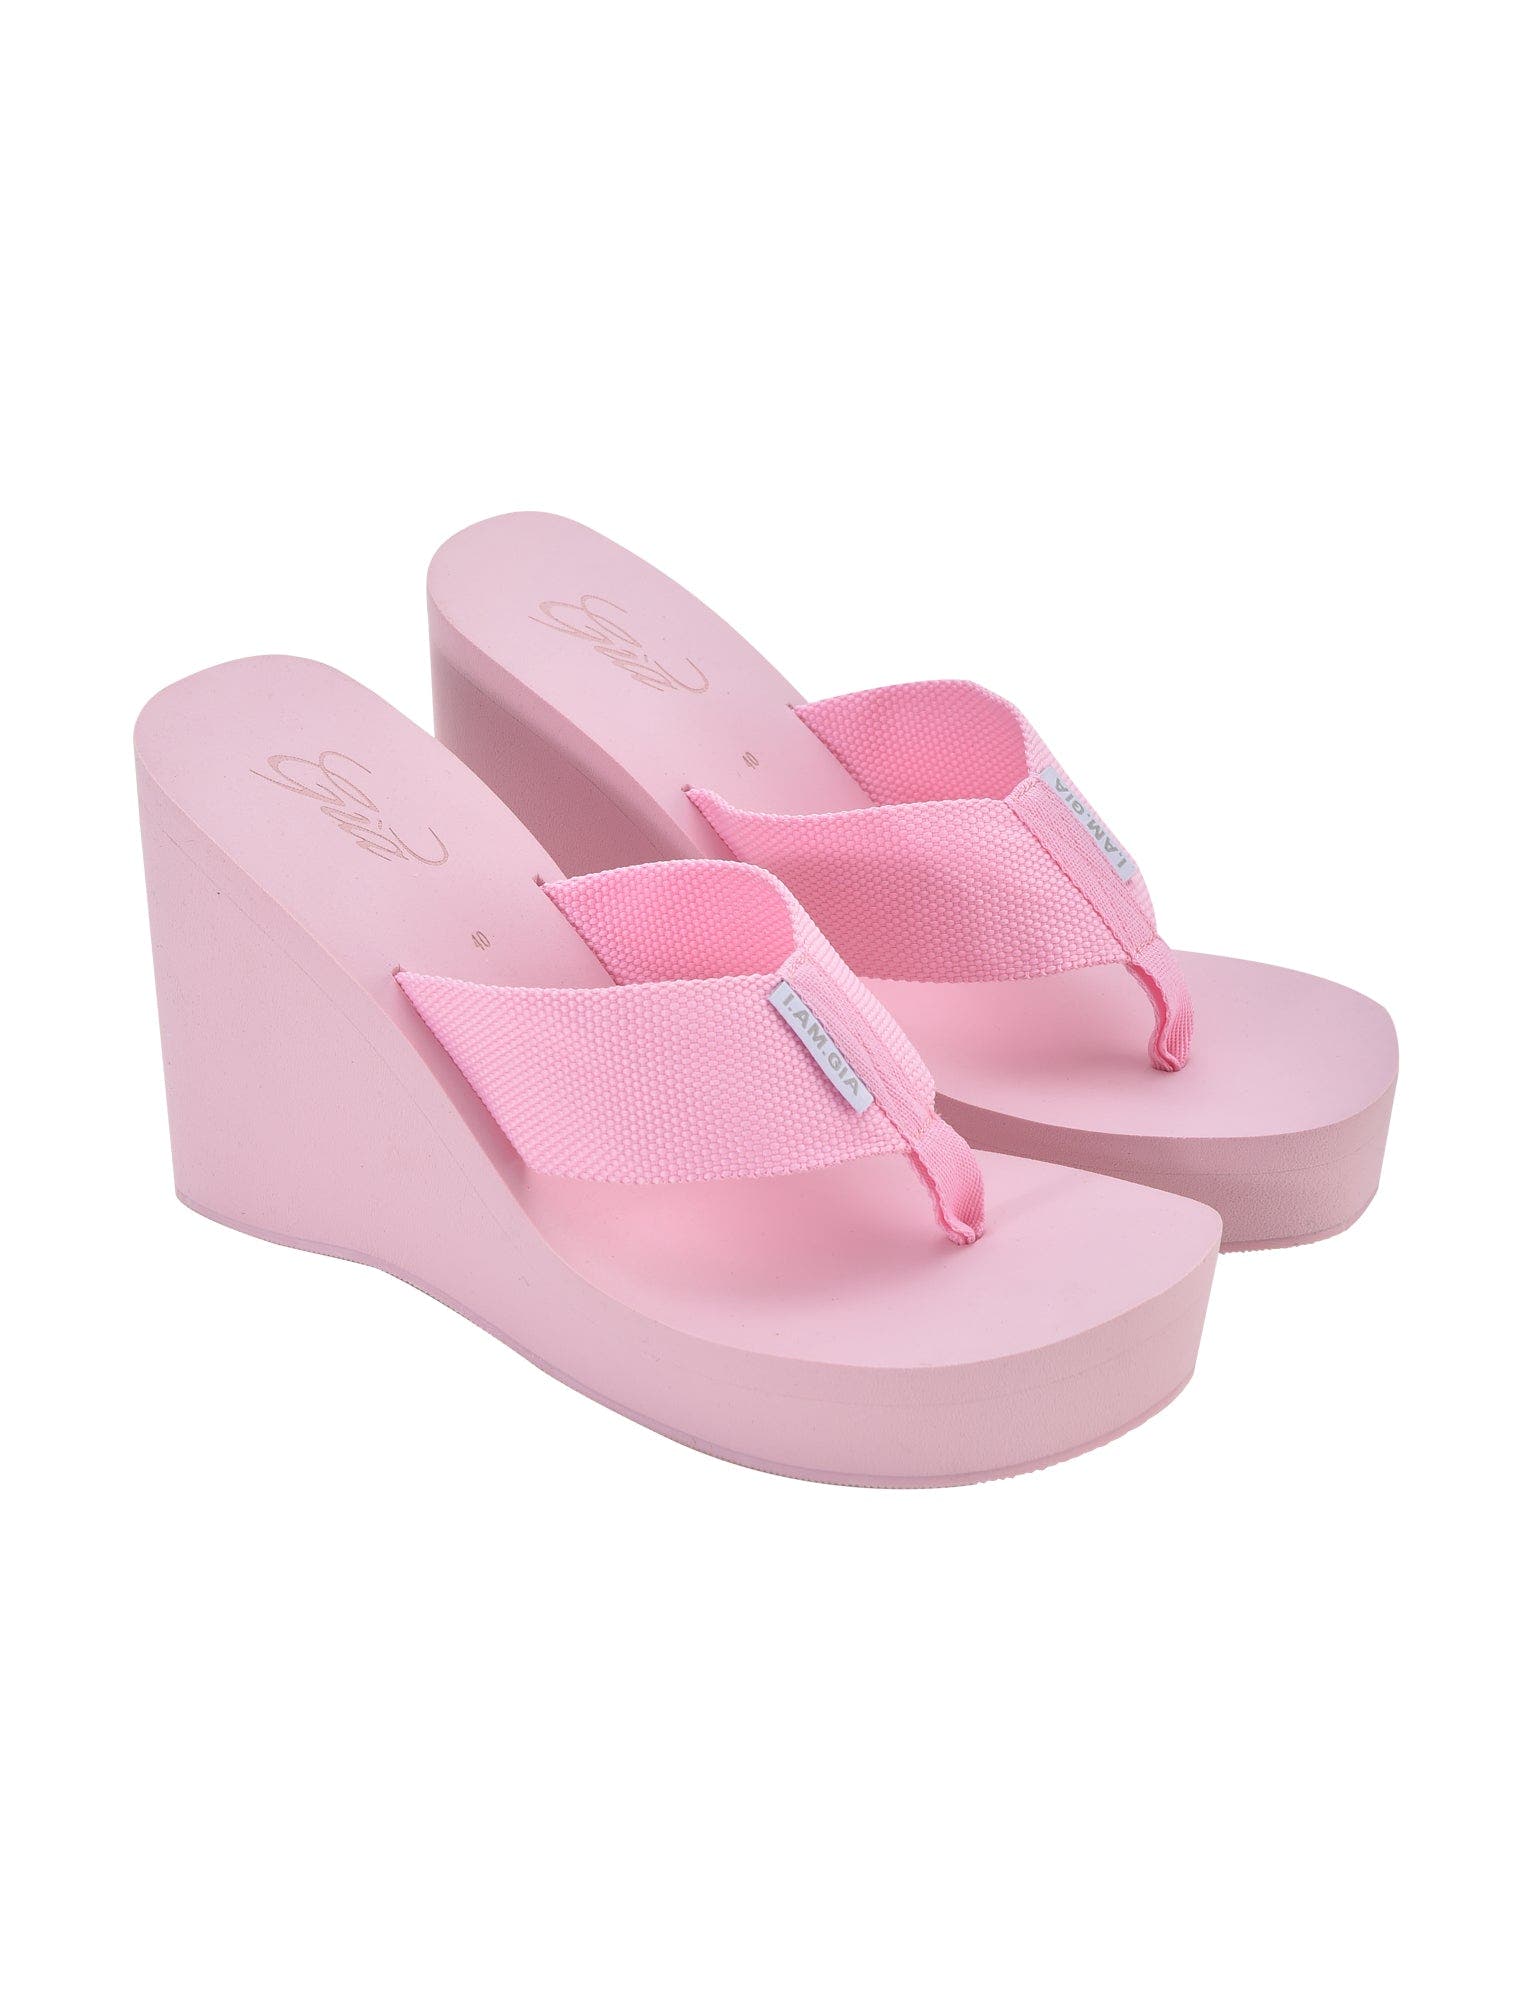 SHELBY FLIP FLOP - PINK : BABY PINK